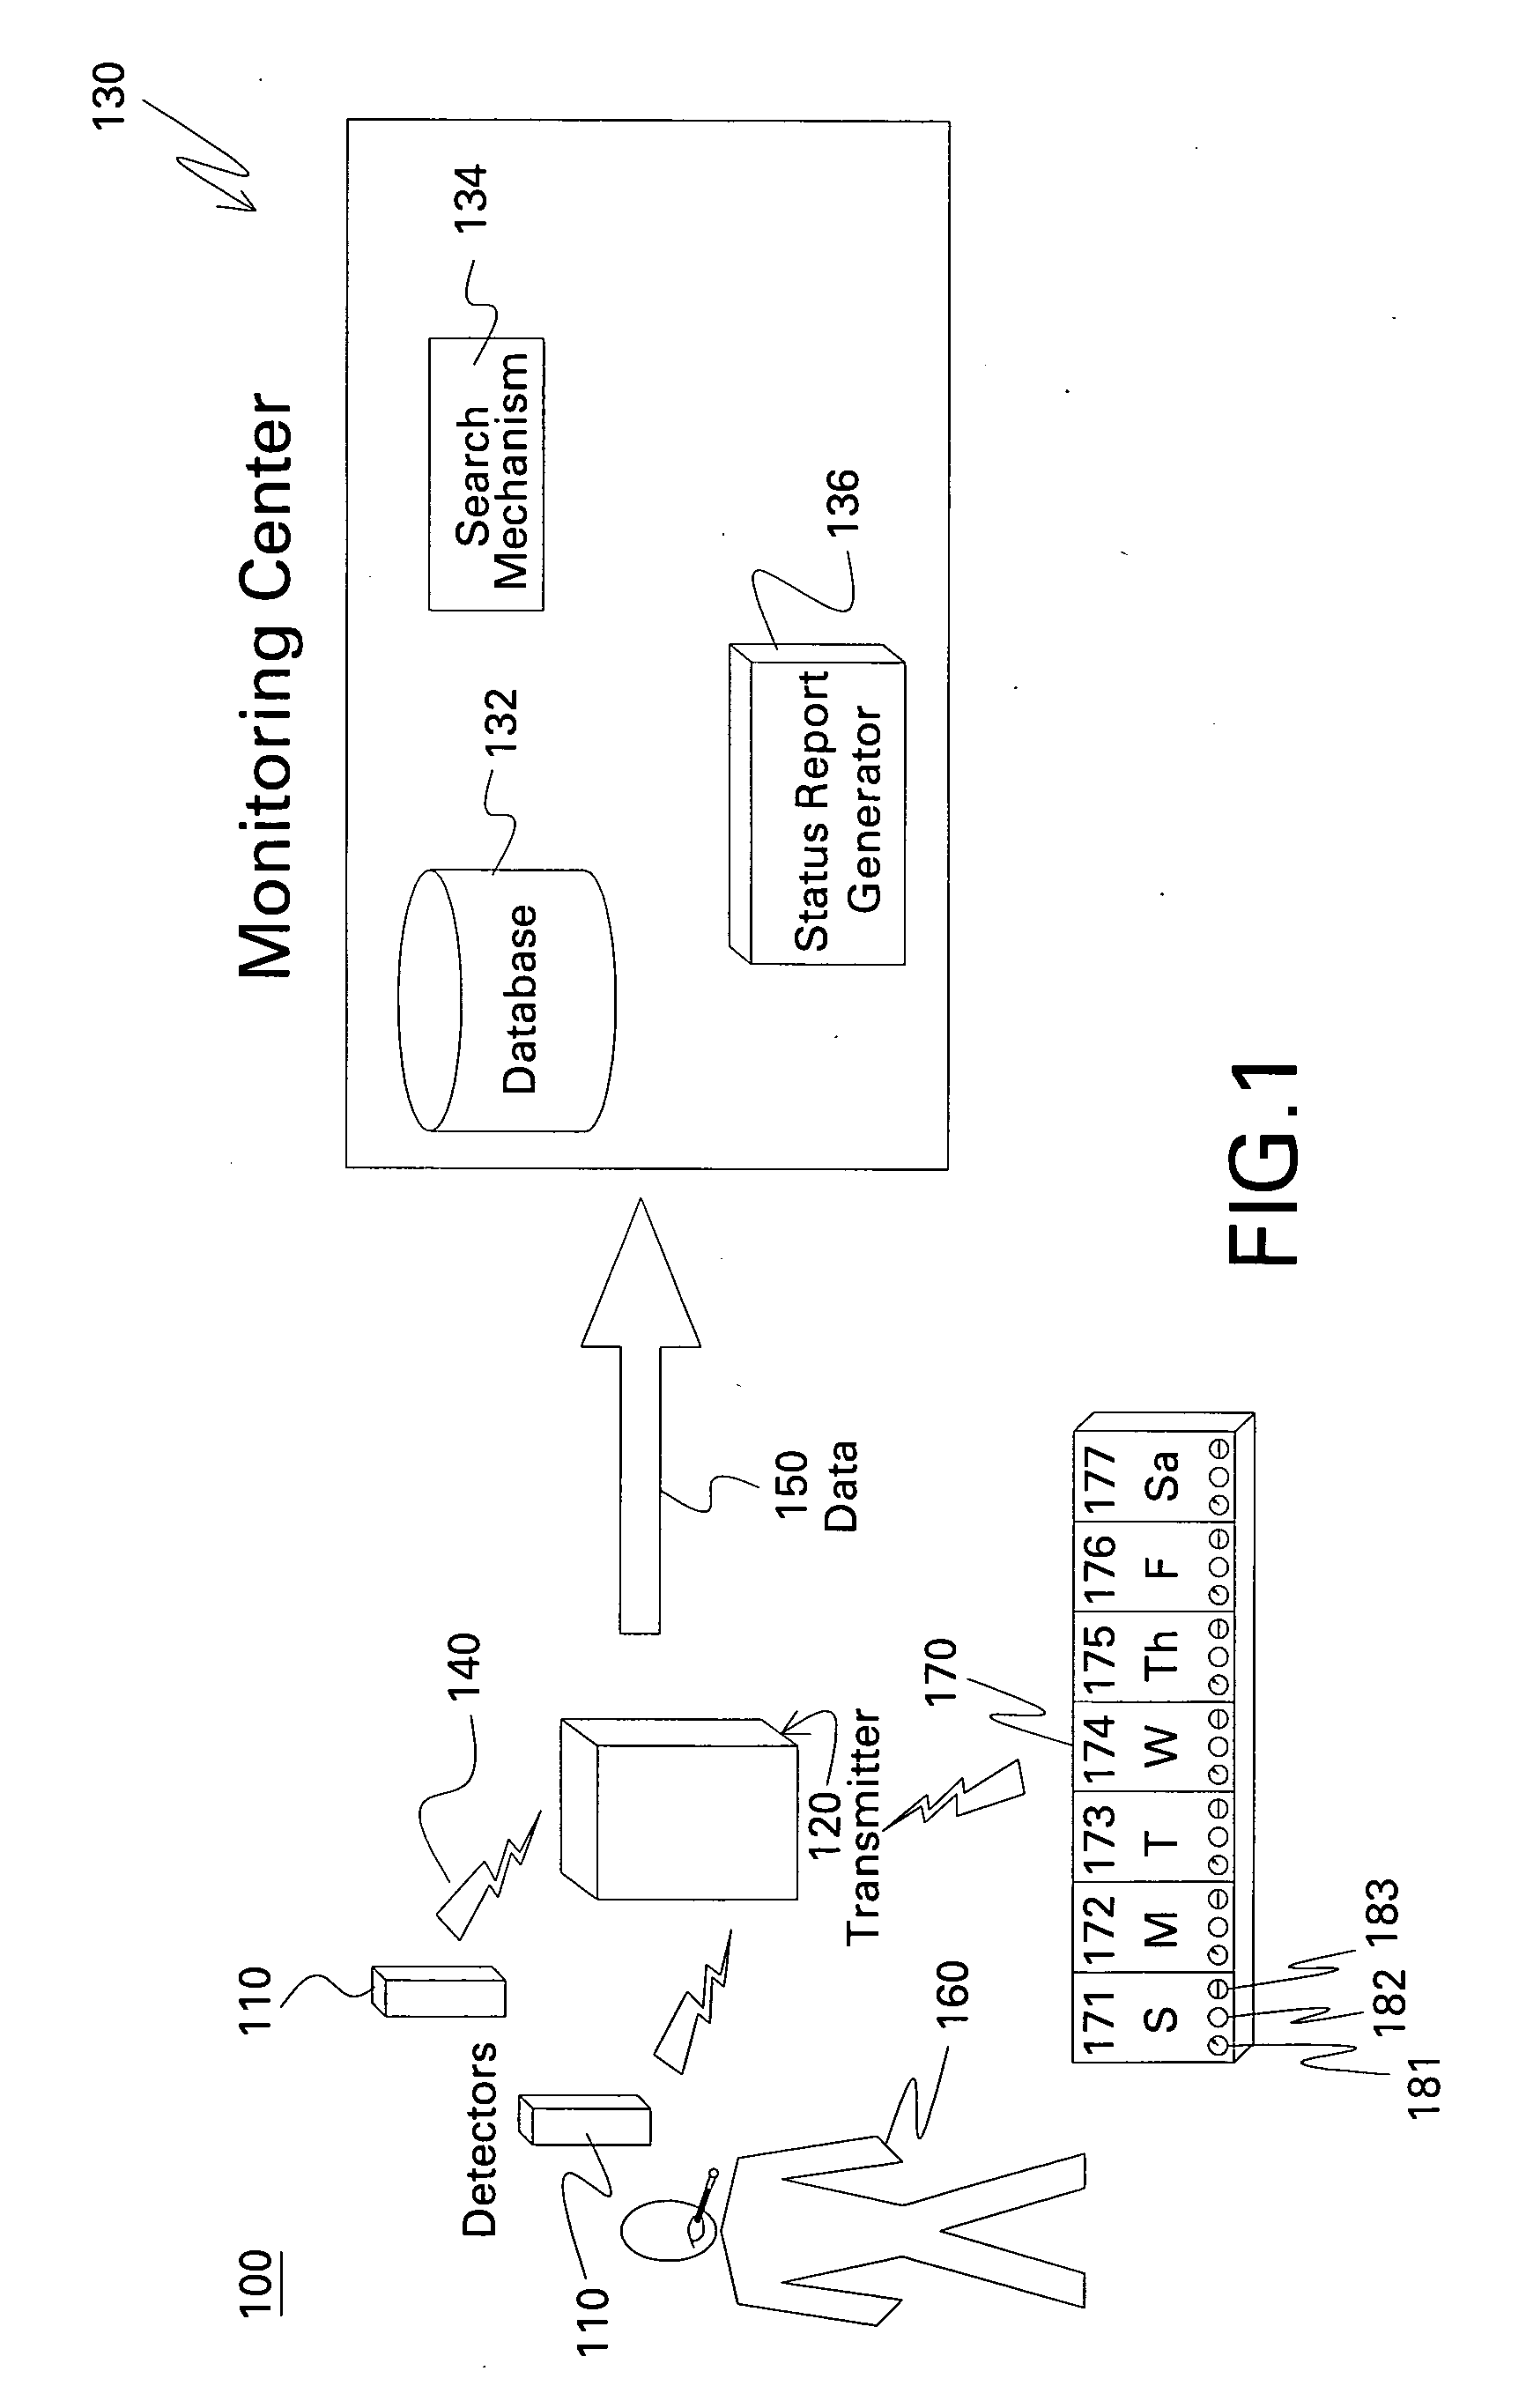 Medicament compliance monitoring system, method, and medicament container